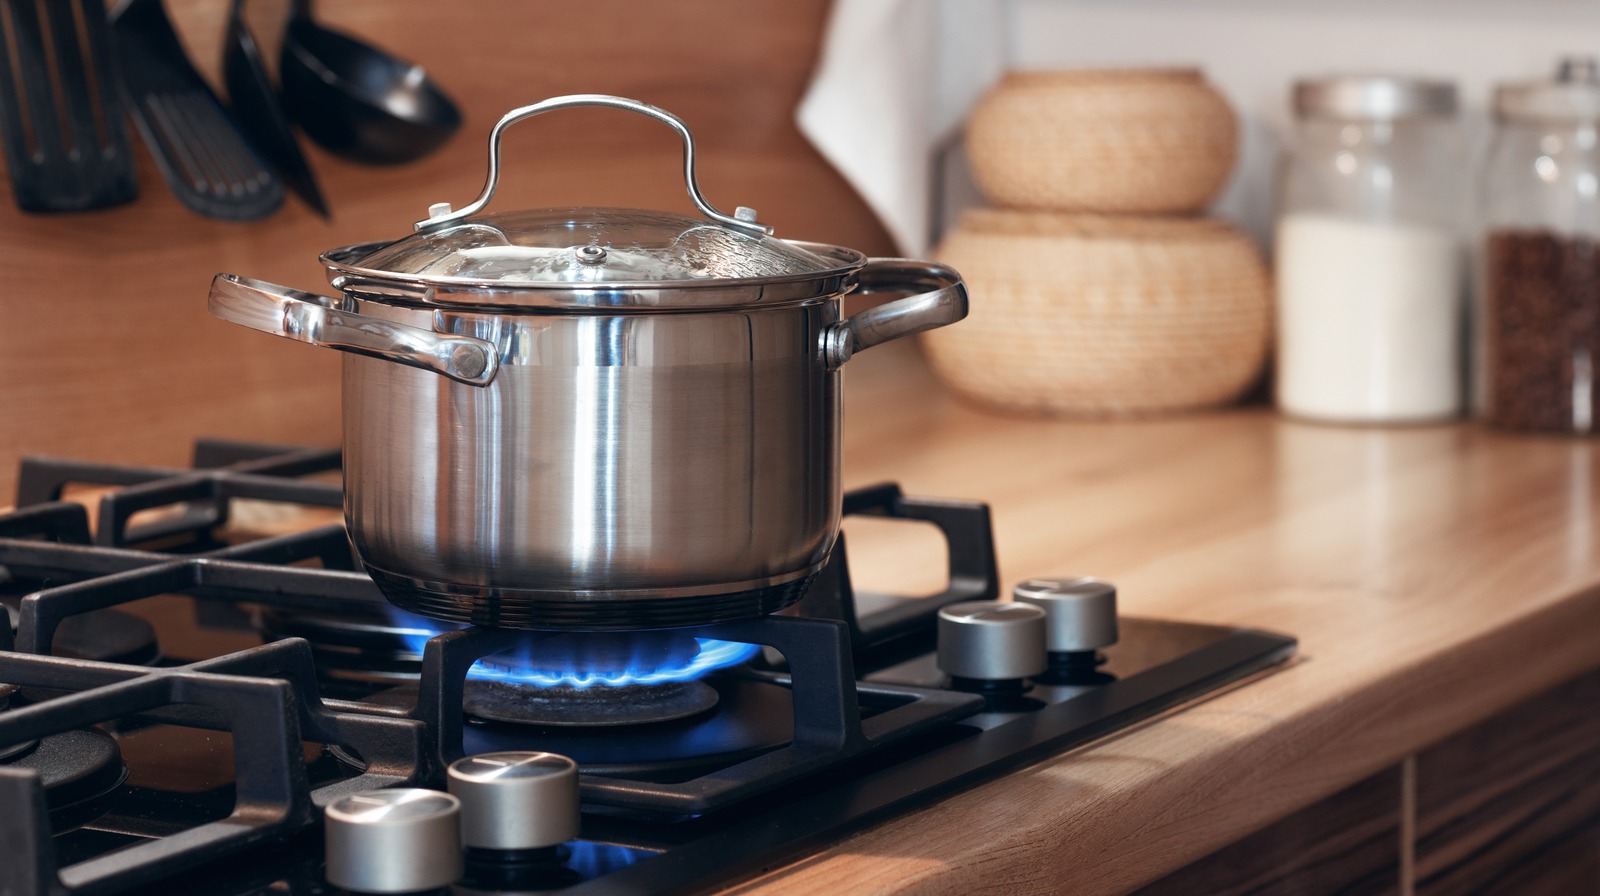 https://www.thedailymeal.com/img/gallery/the-fascinating-history-of-the-gas-stove/l-intro-1675808333.jpg